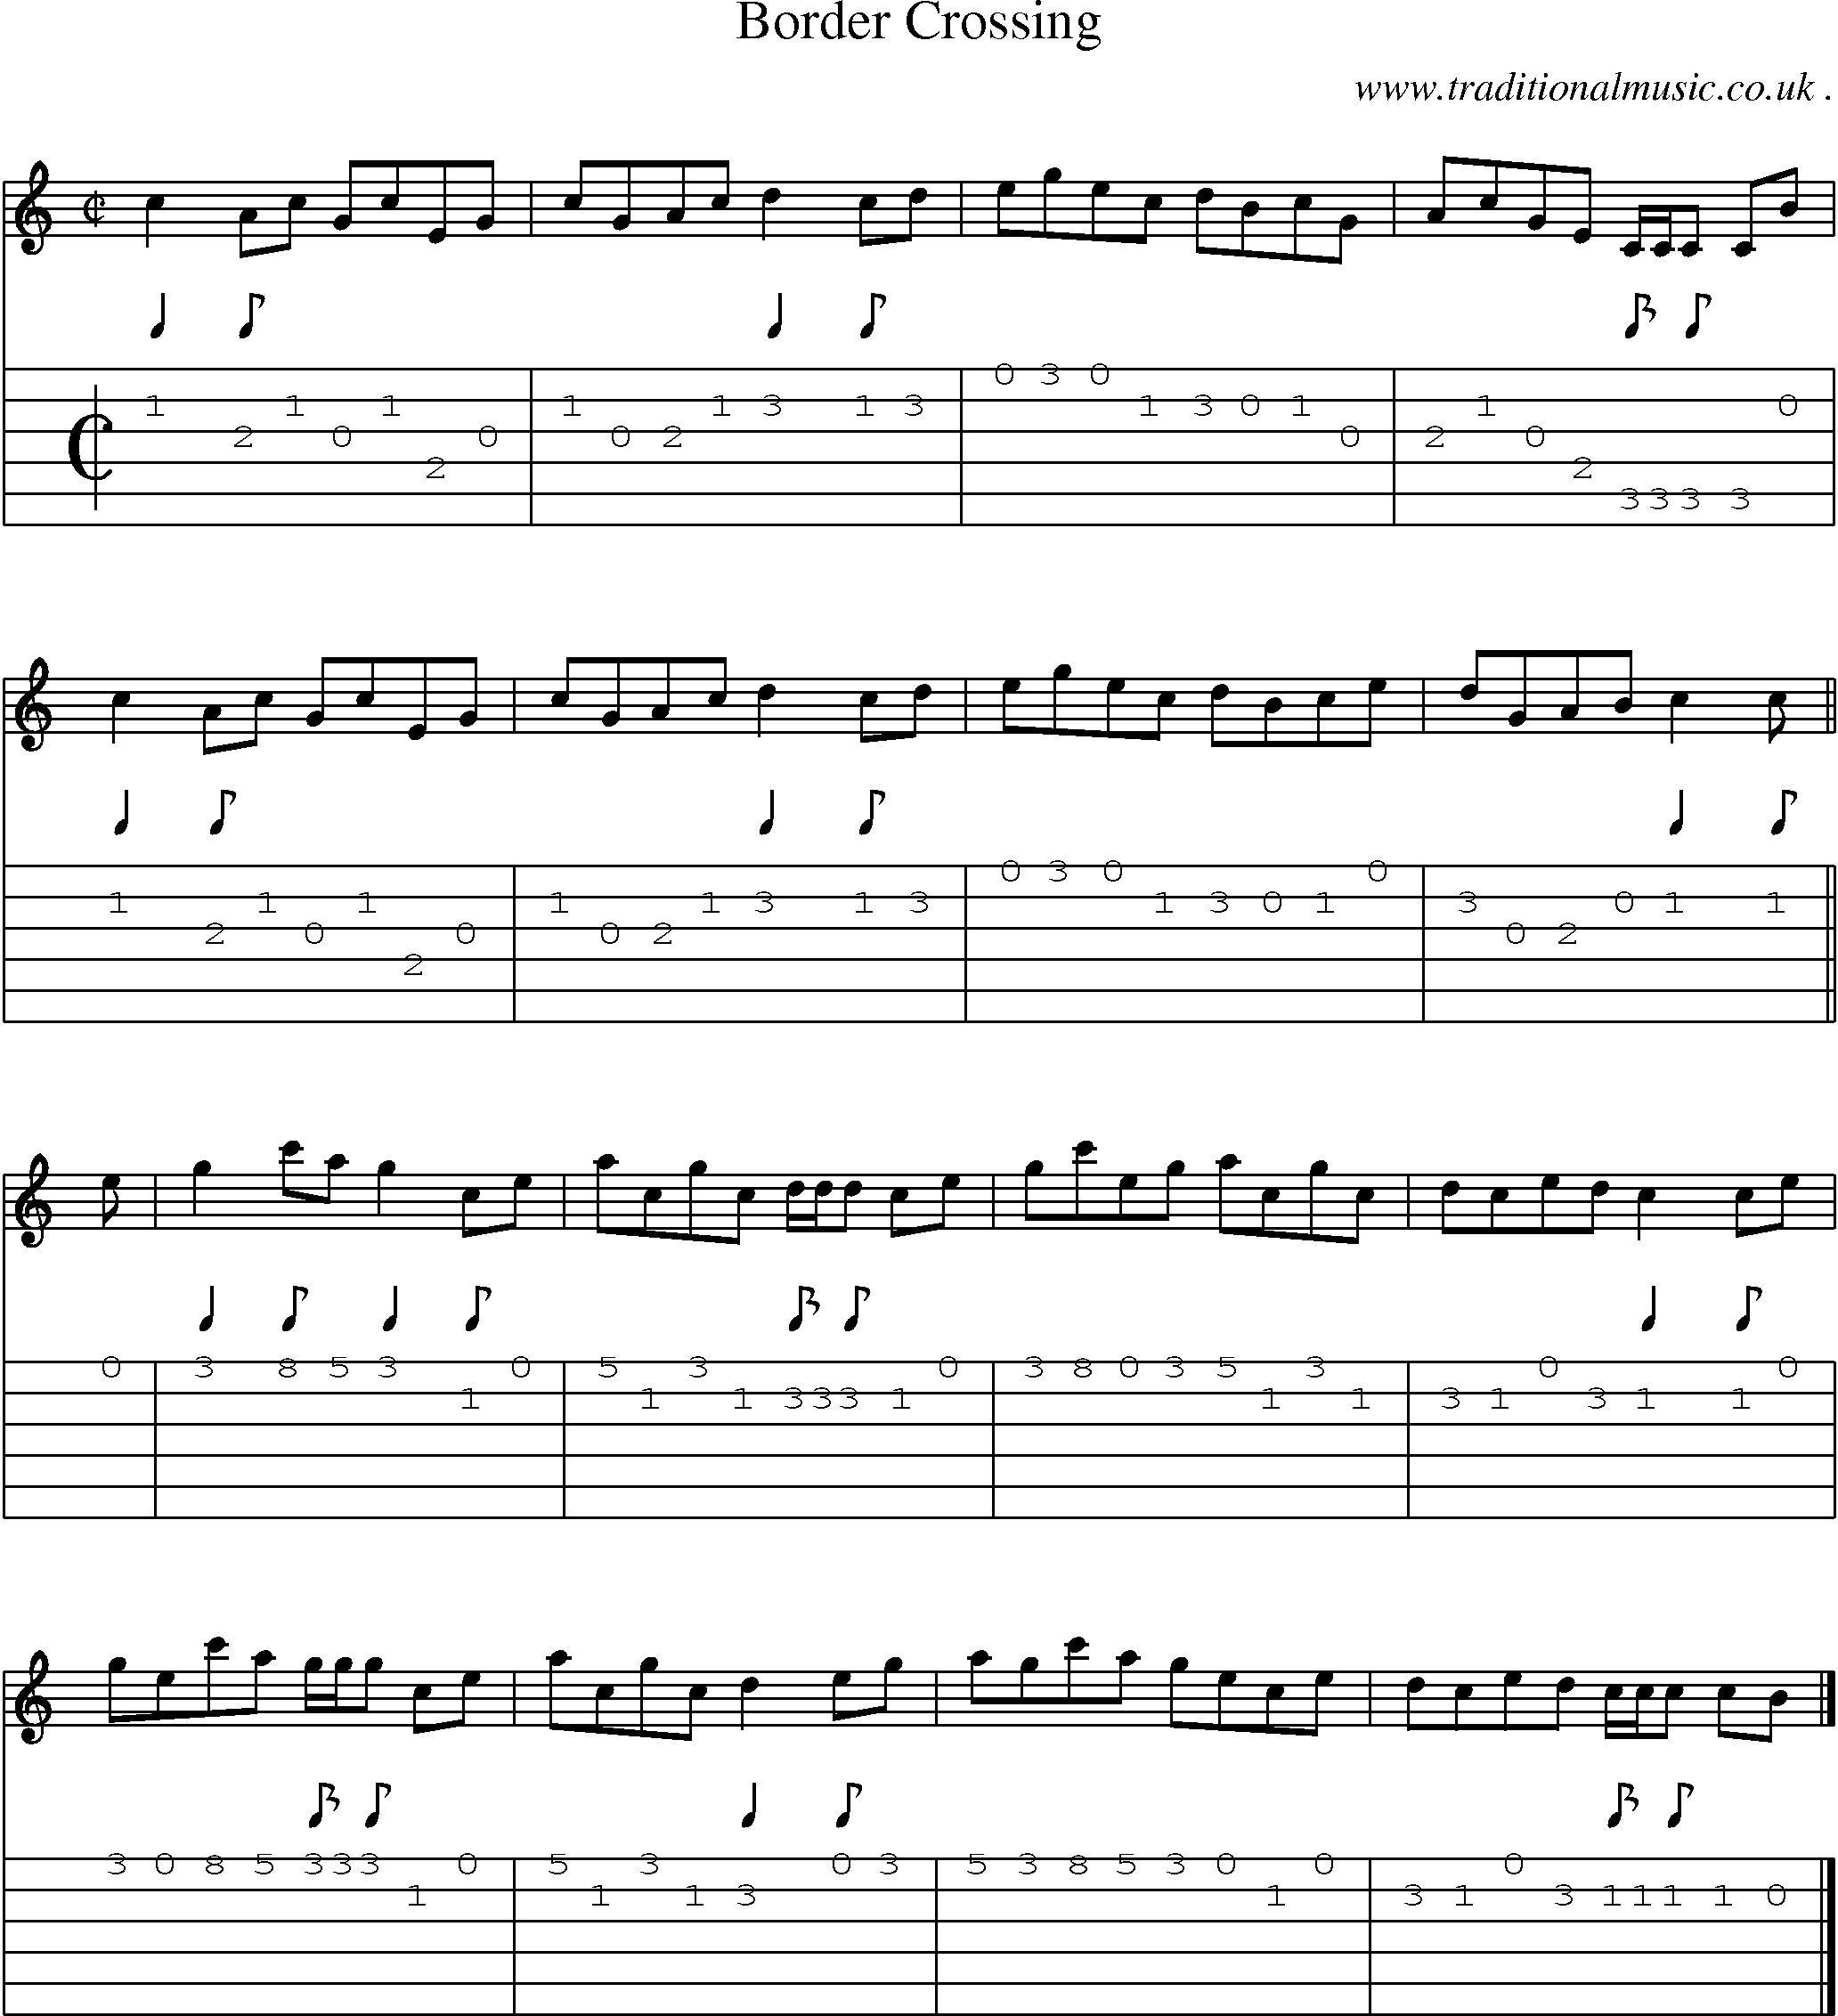 Sheet-music  score, Chords and Guitar Tabs for Border Crossing